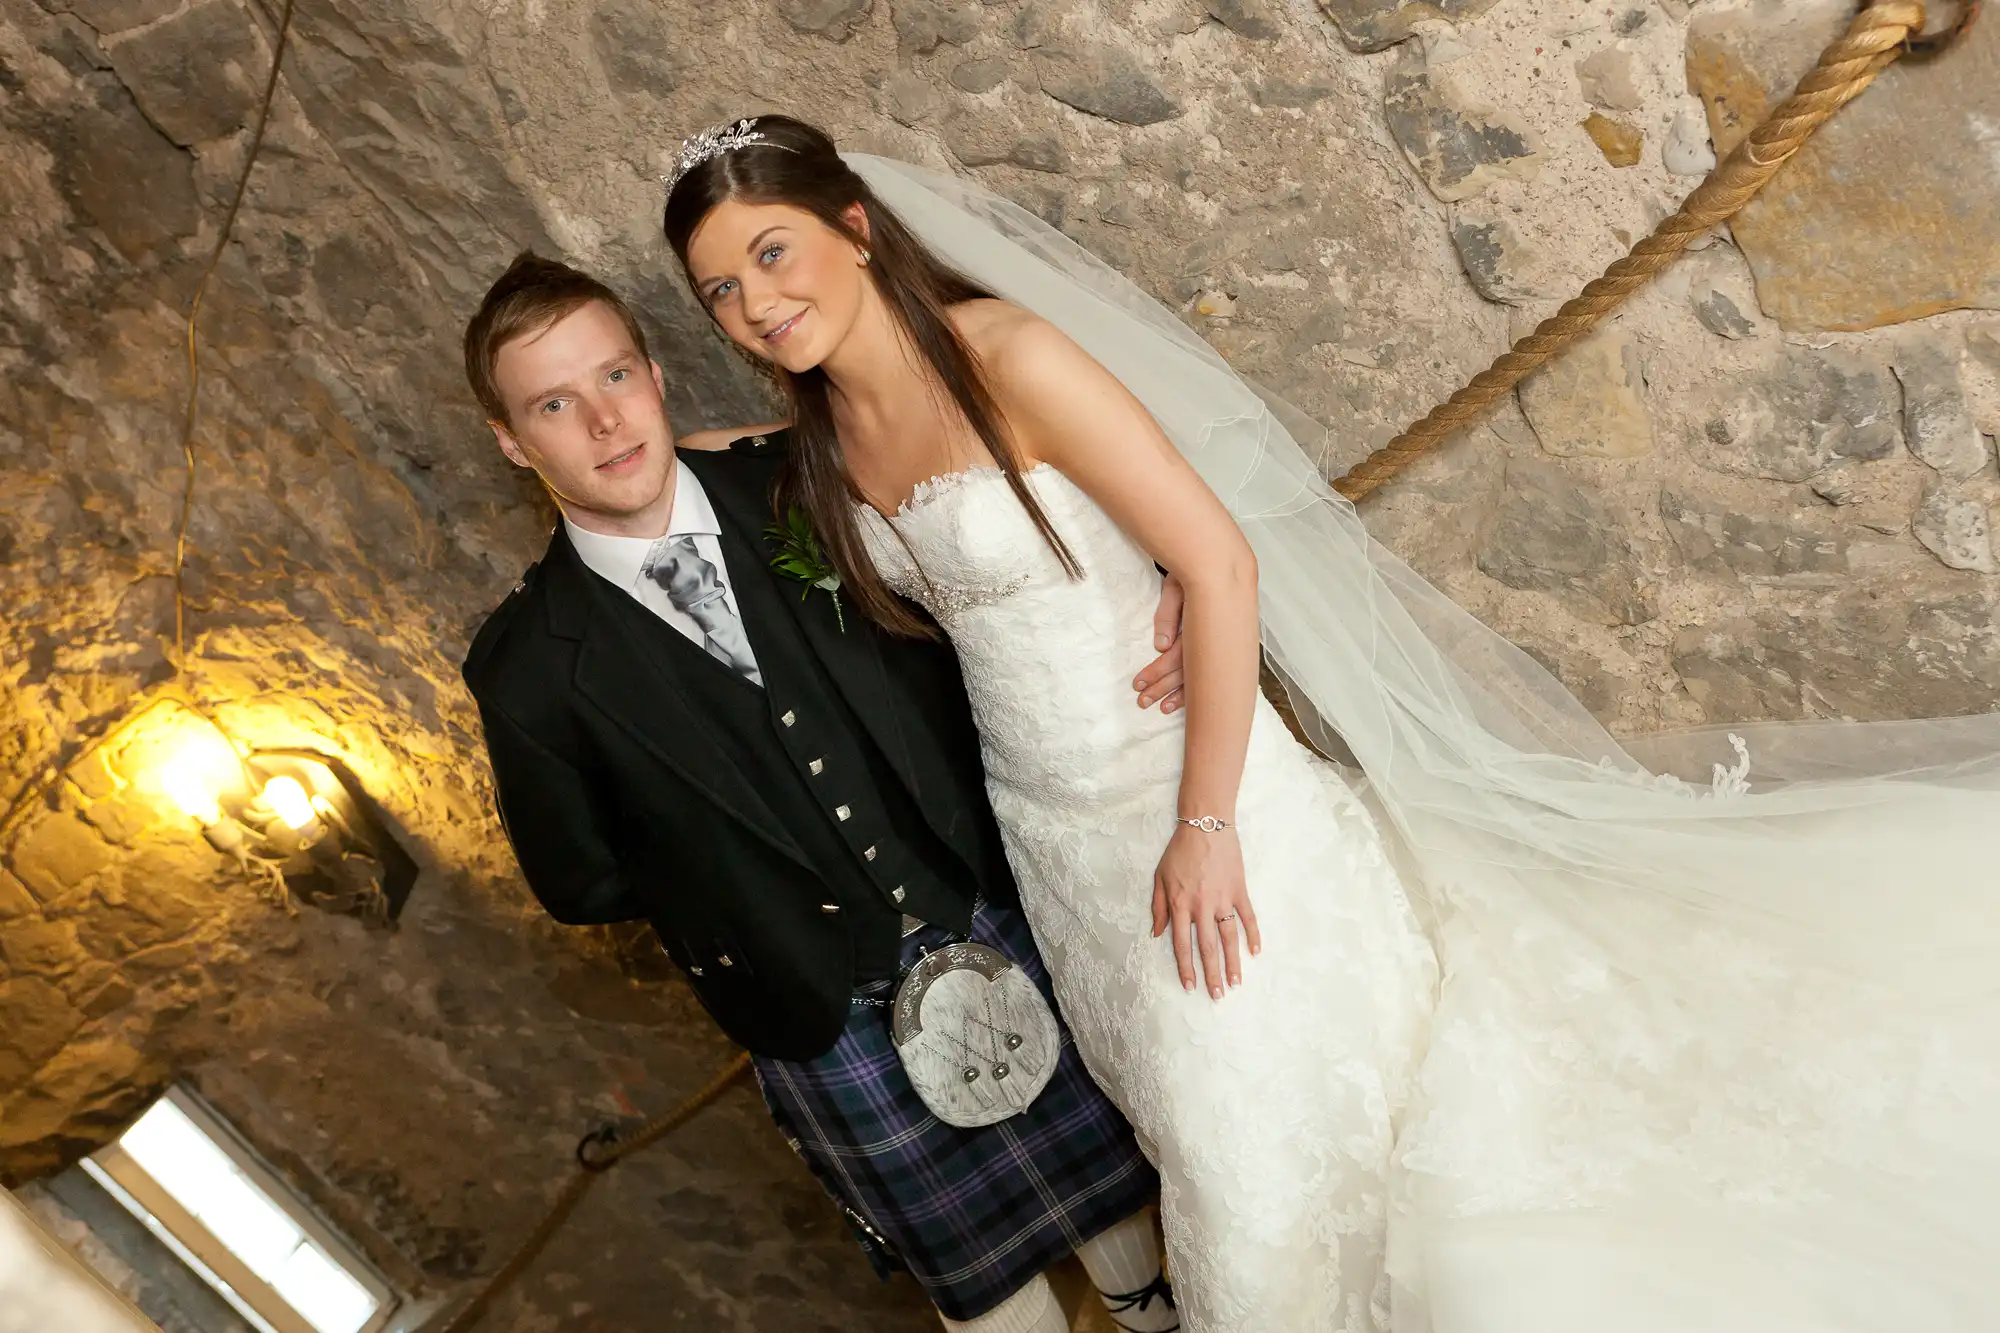 A newlywed couple posing in a stone-walled room, the groom in a kilt and the bride in a white dress, both smiling at the camera.